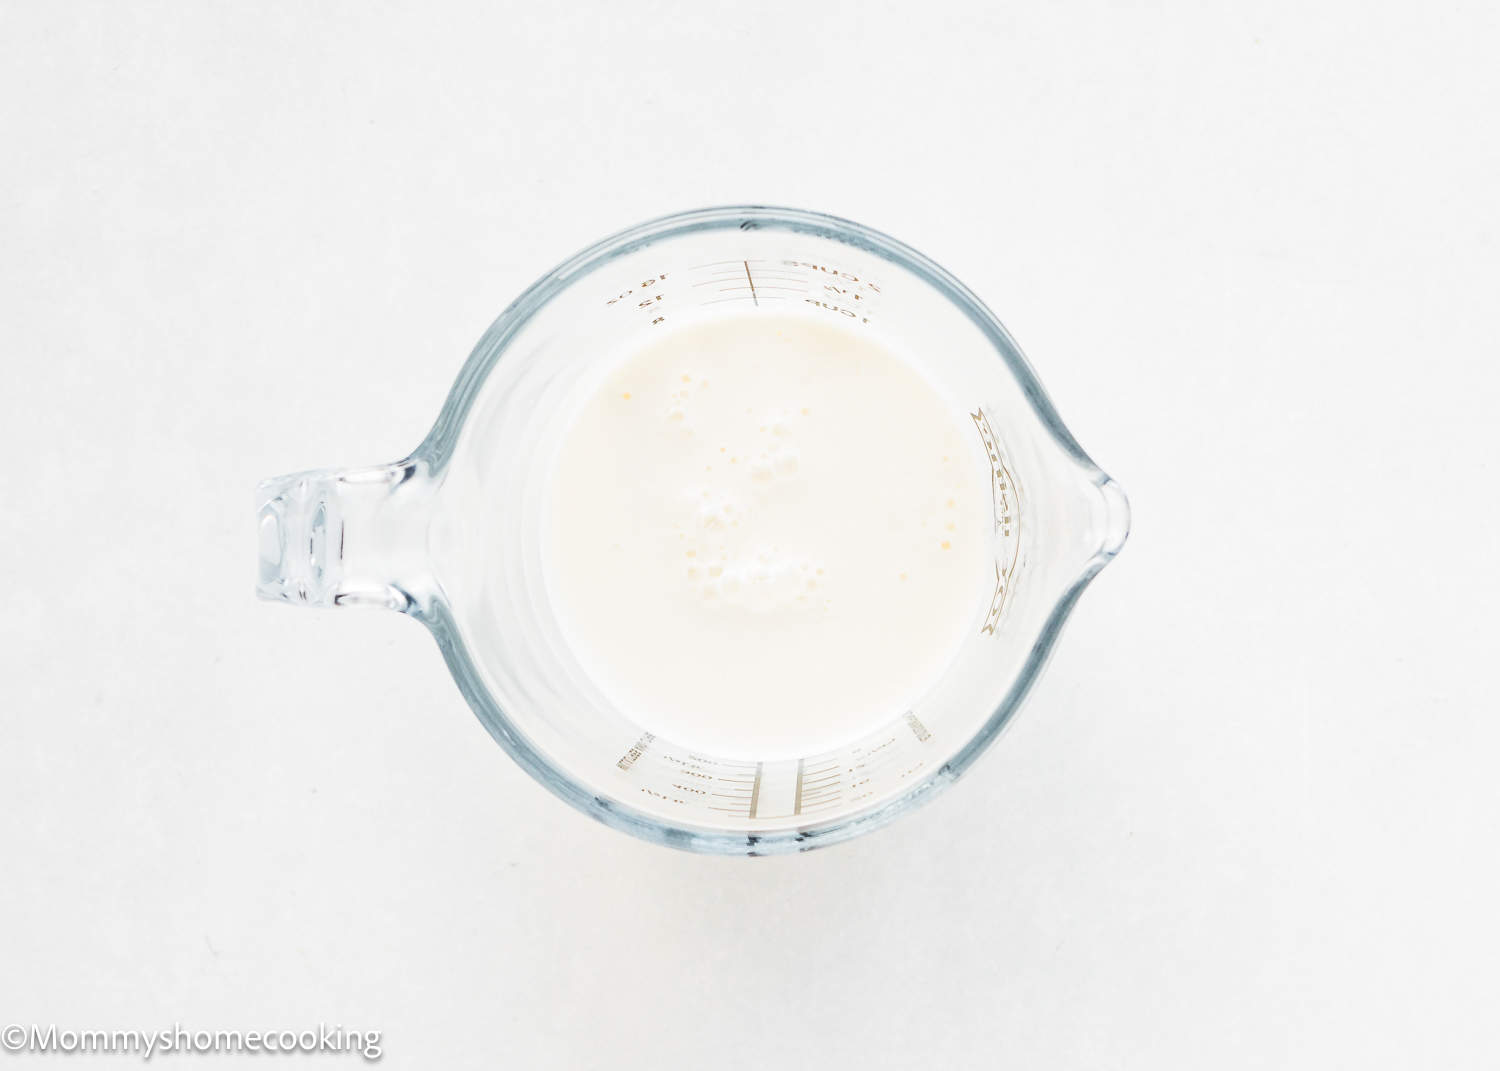 A glass measuring cup filled with creamy milk.